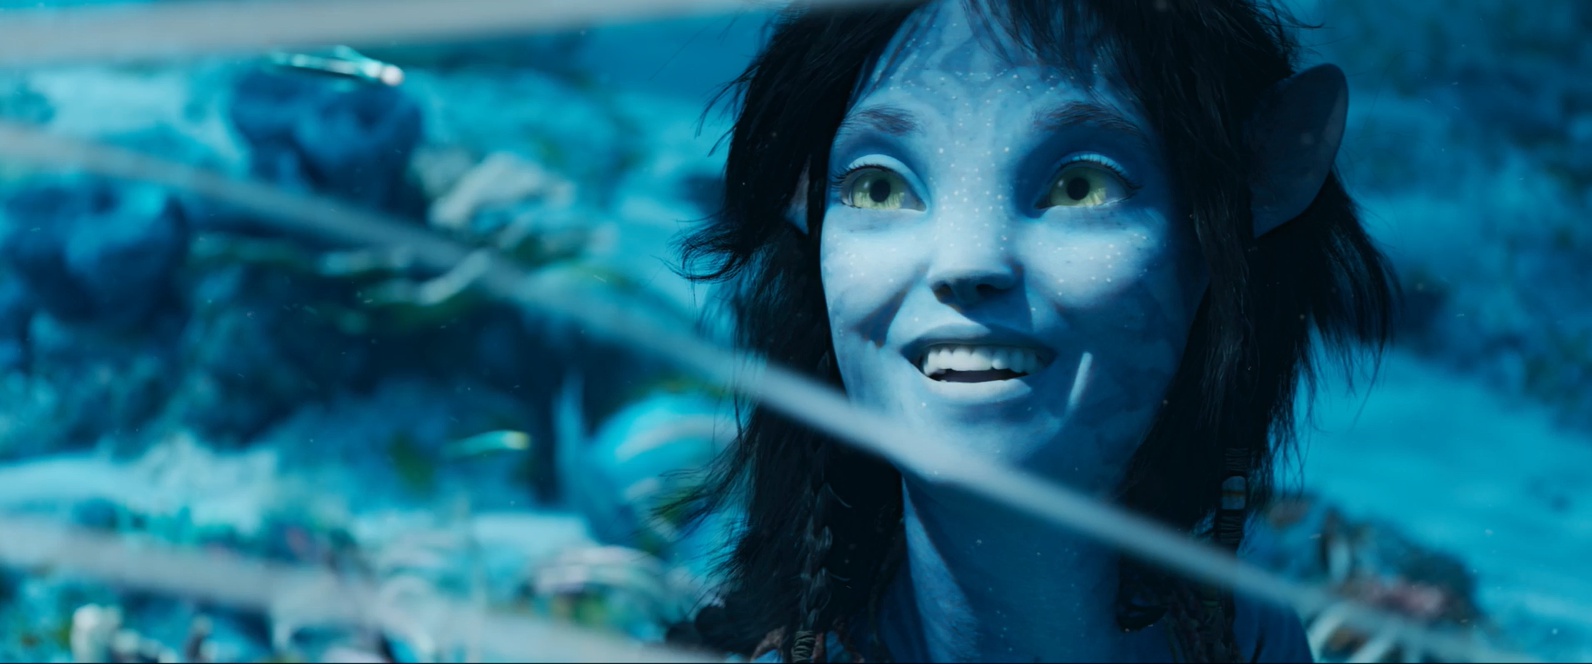 Avatar: The Water Way recycled a surprising amount of motion capture scenes from the first film